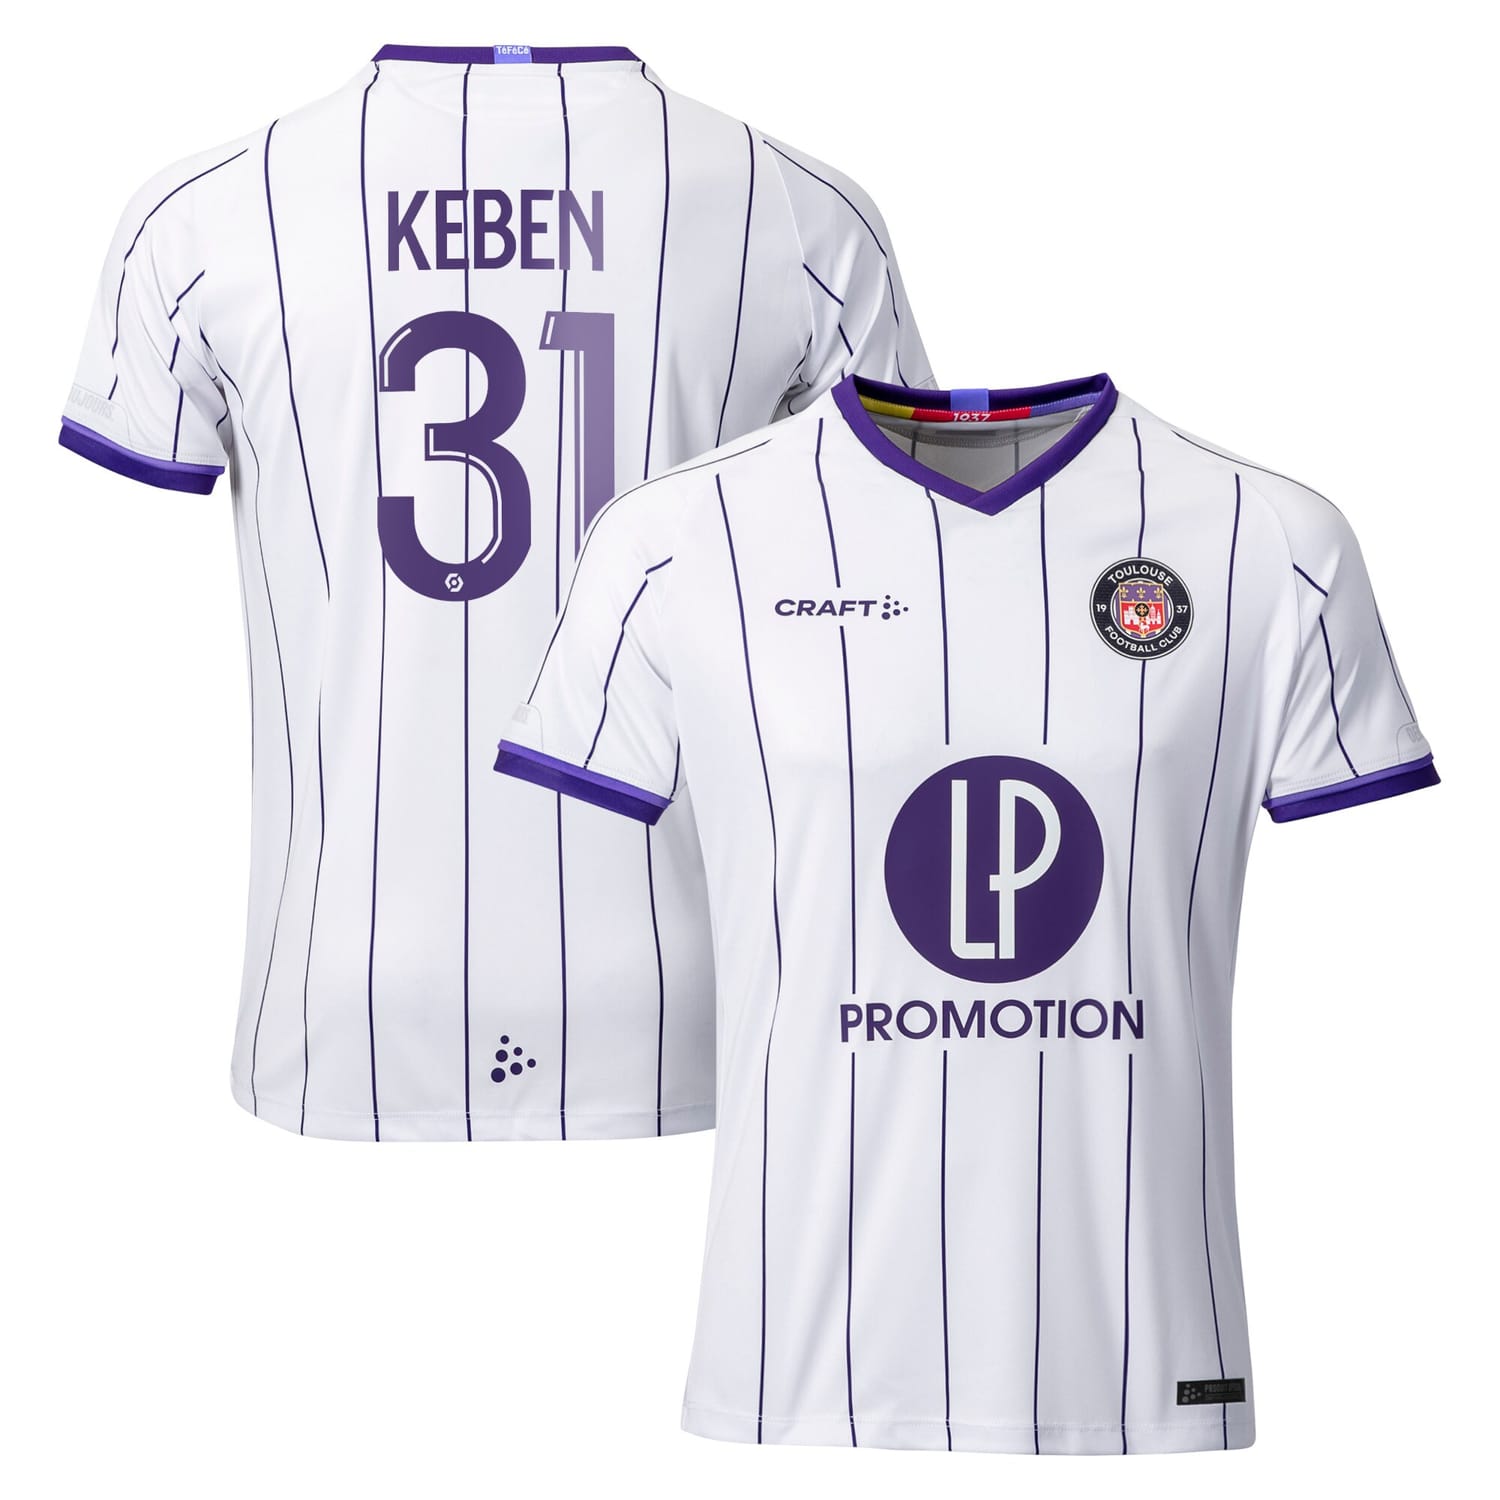 Ligue 1 Toulouse Home Jersey Shirt 2022-23 player Kévin Keben 31 printing for Women